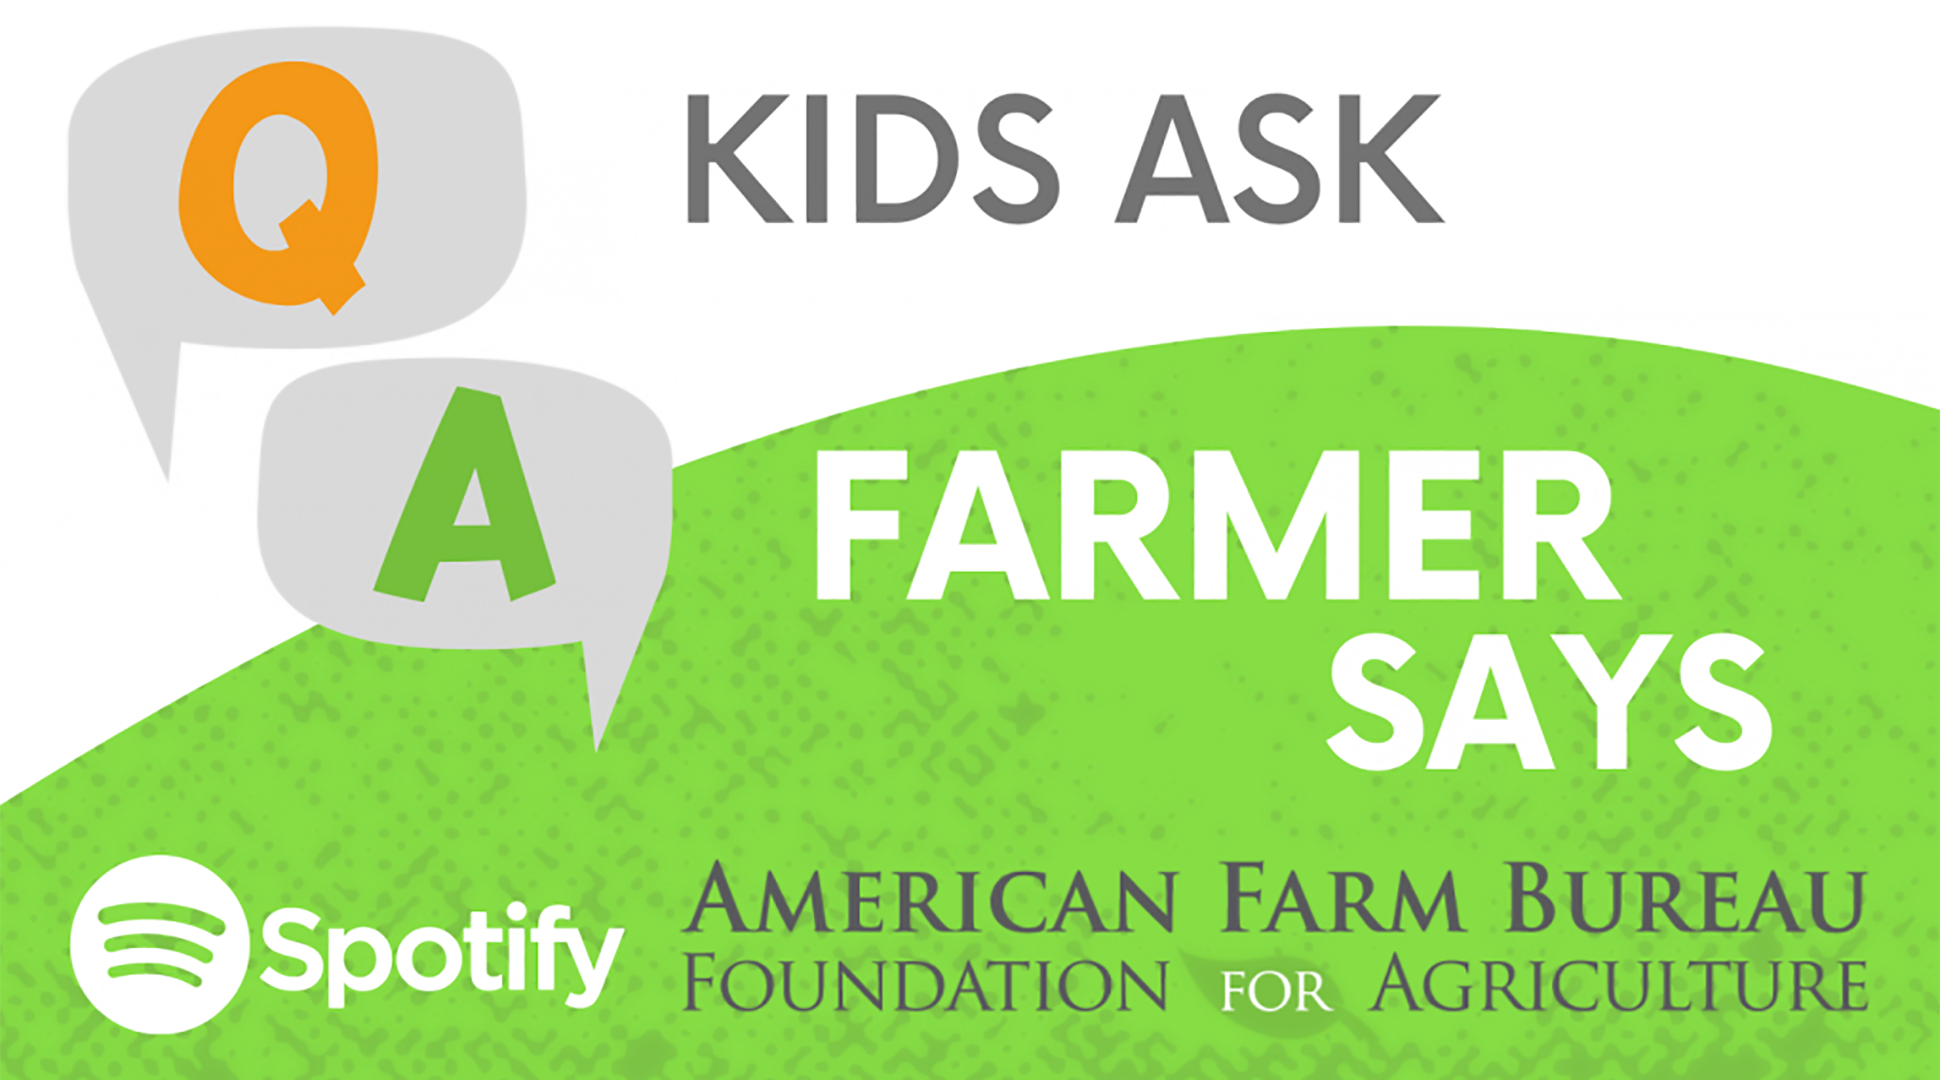 Farm-related podcast for kids